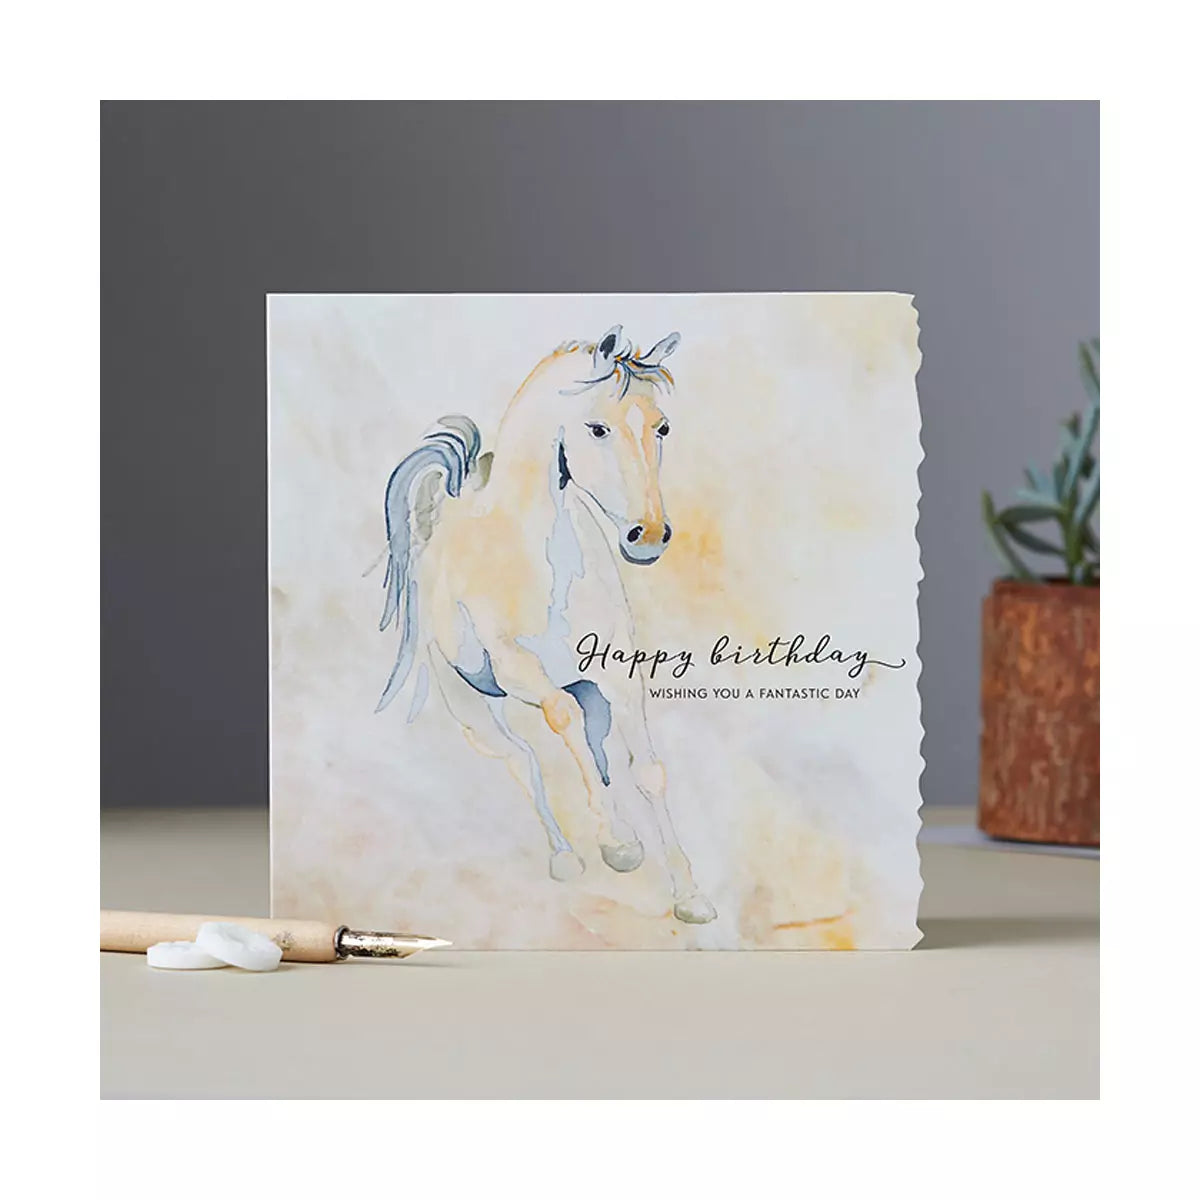 Deckled Edge Fanciful Dolomite Card Happy Birthday Fantastic Day Gift Cards Barnstaple Equestrian Supplies